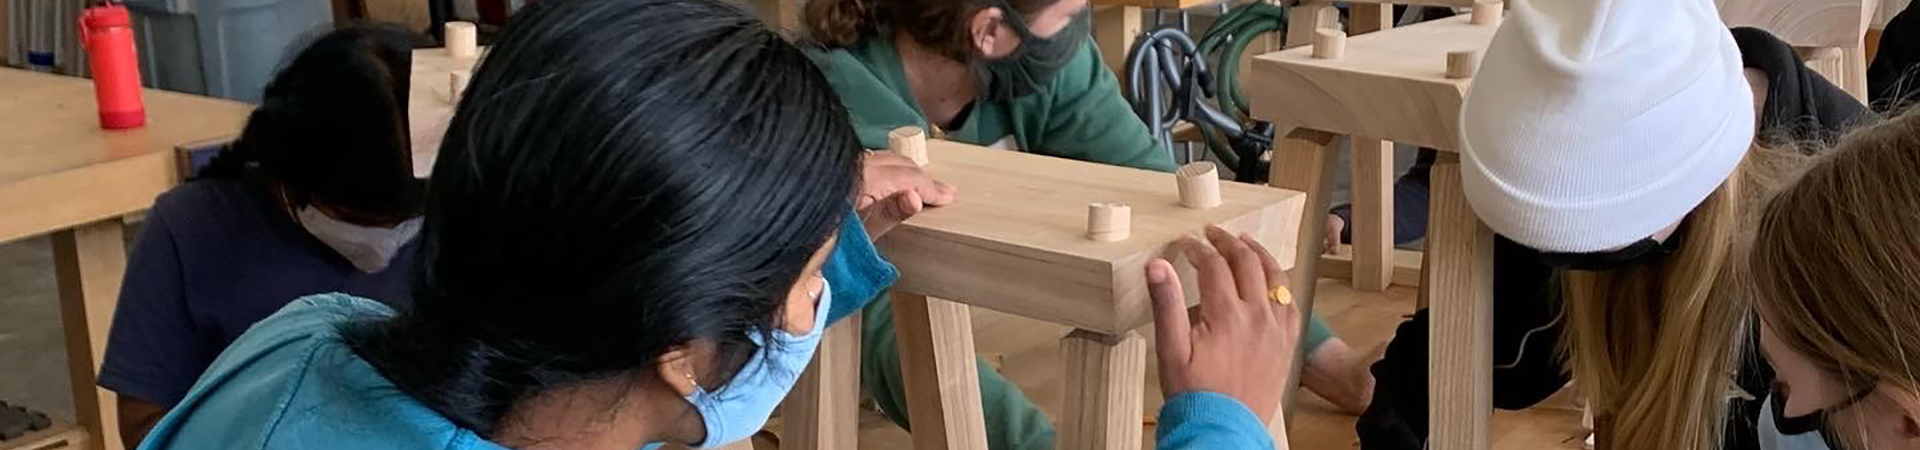  A group of Girl Scouts building stools in a woodshop 